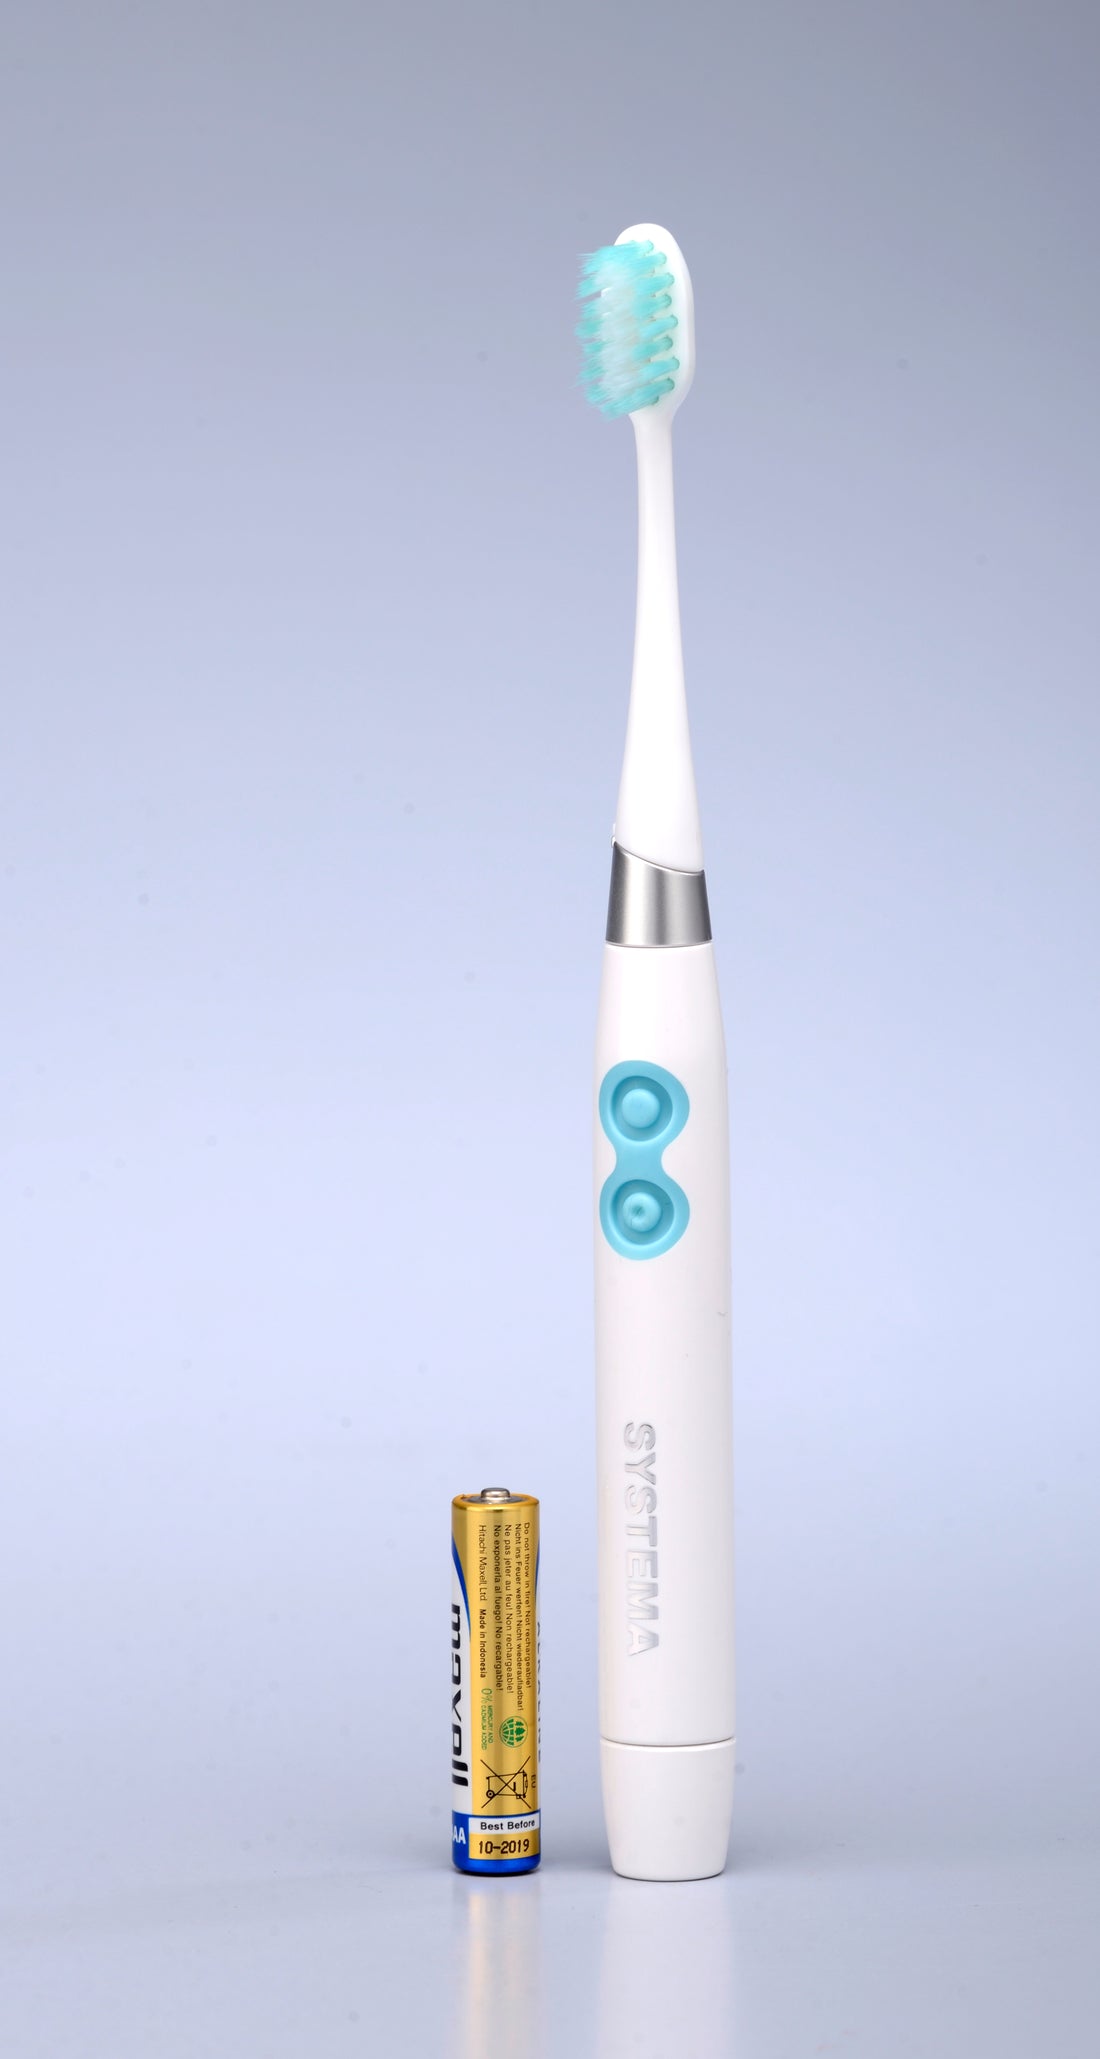 Systema SONIC Toothbrush and replacement brush head